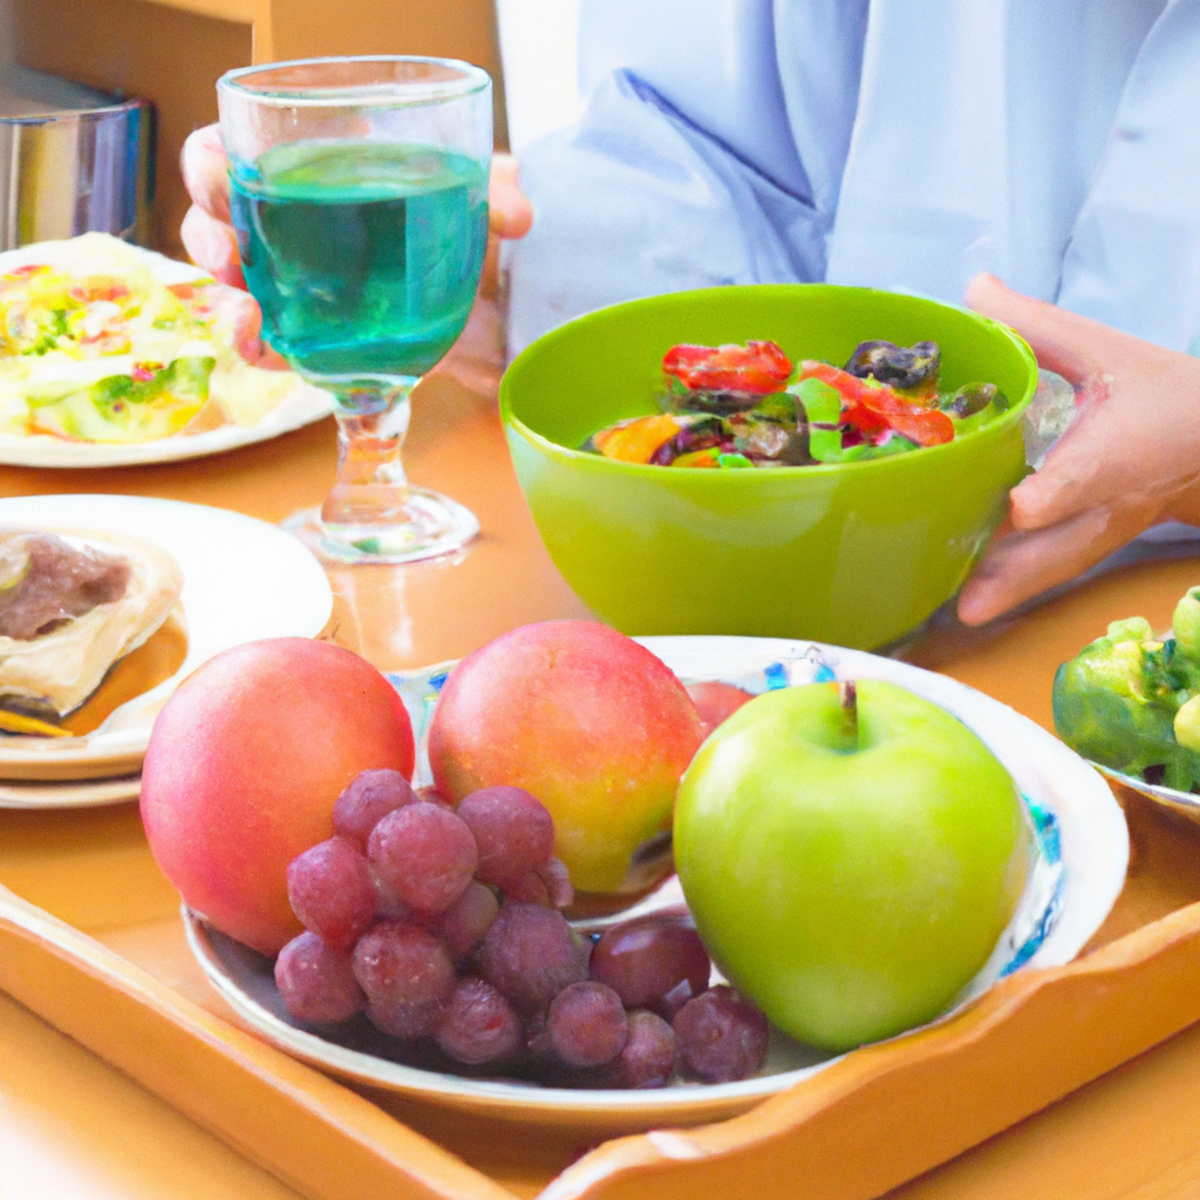 Balanced and nutritious meal with fruits, vegetables, whole grains, lean proteins, and hydration - Alport syndrome